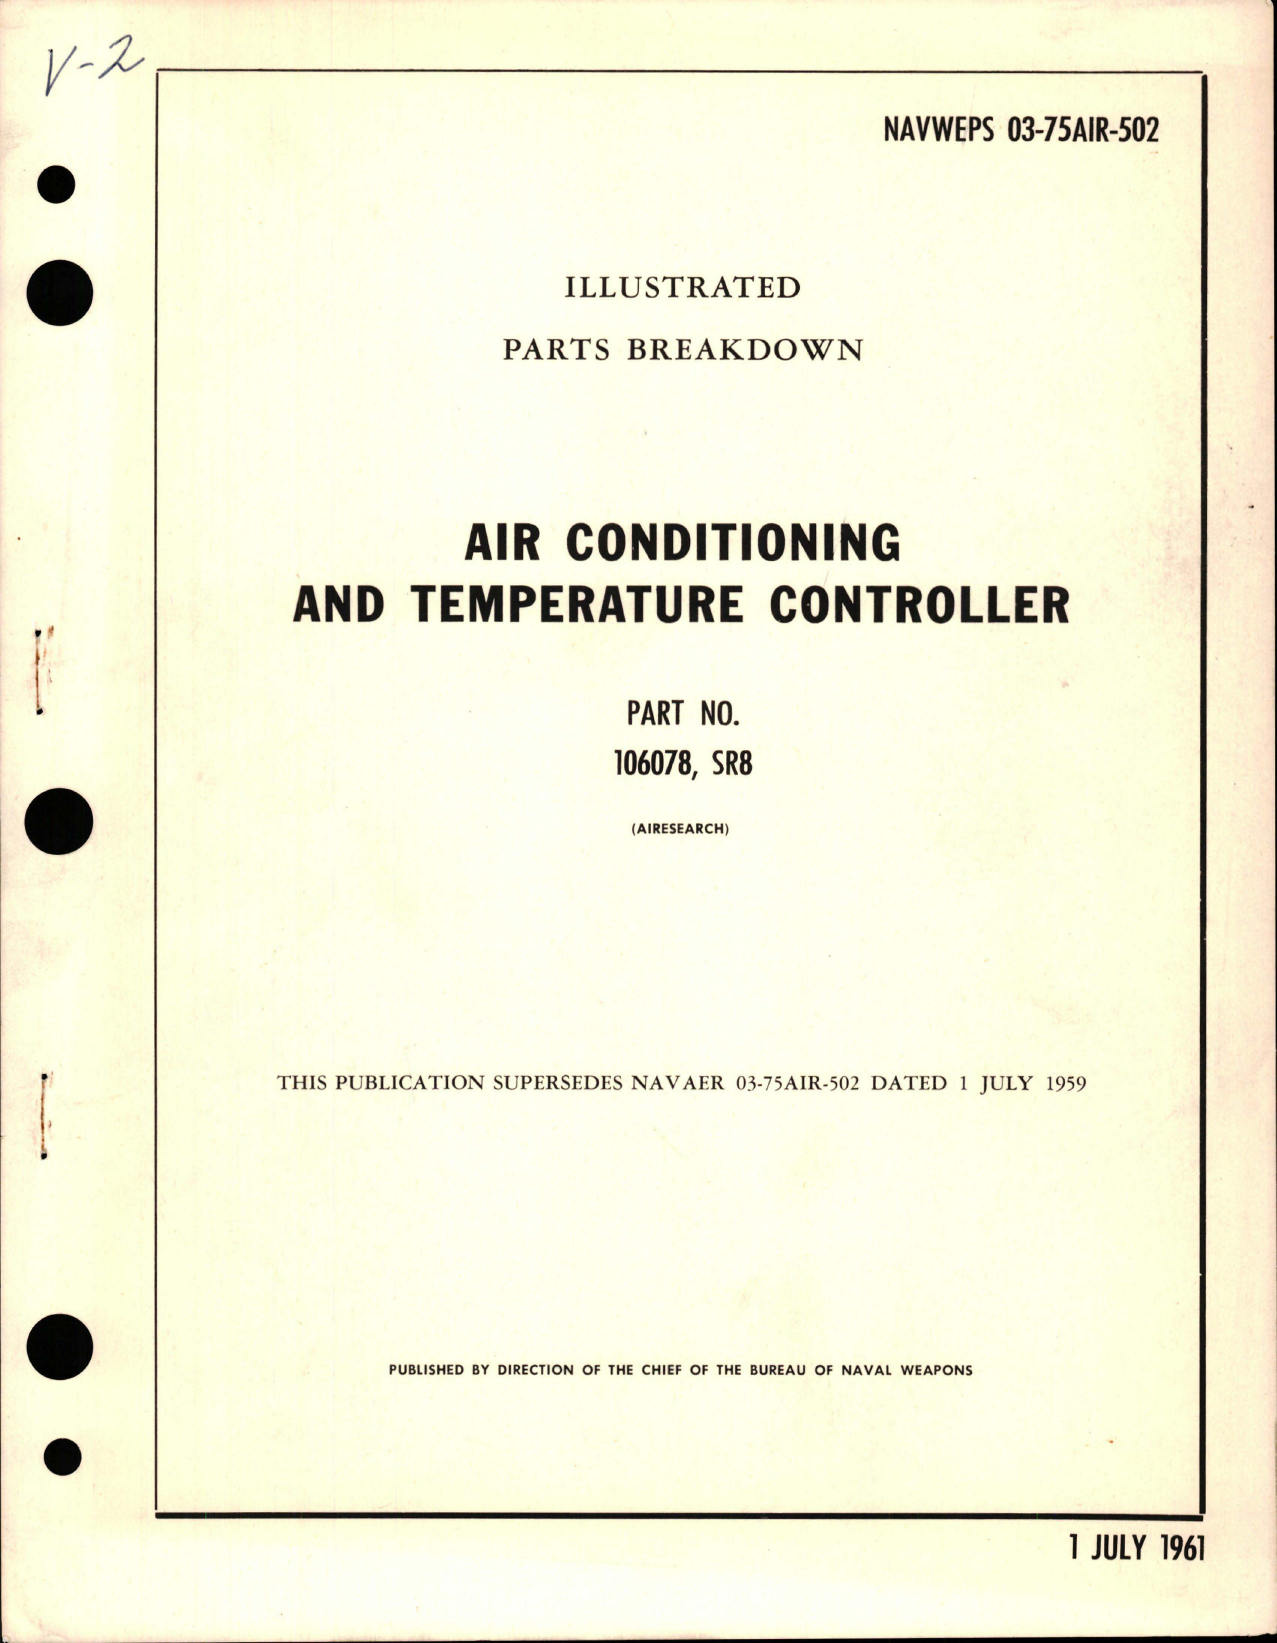 Sample page 1 from AirCorps Library document: Illustrated Parts Breakdown for Air Conditioning and Temperature Controller - Part 106078 and SR8